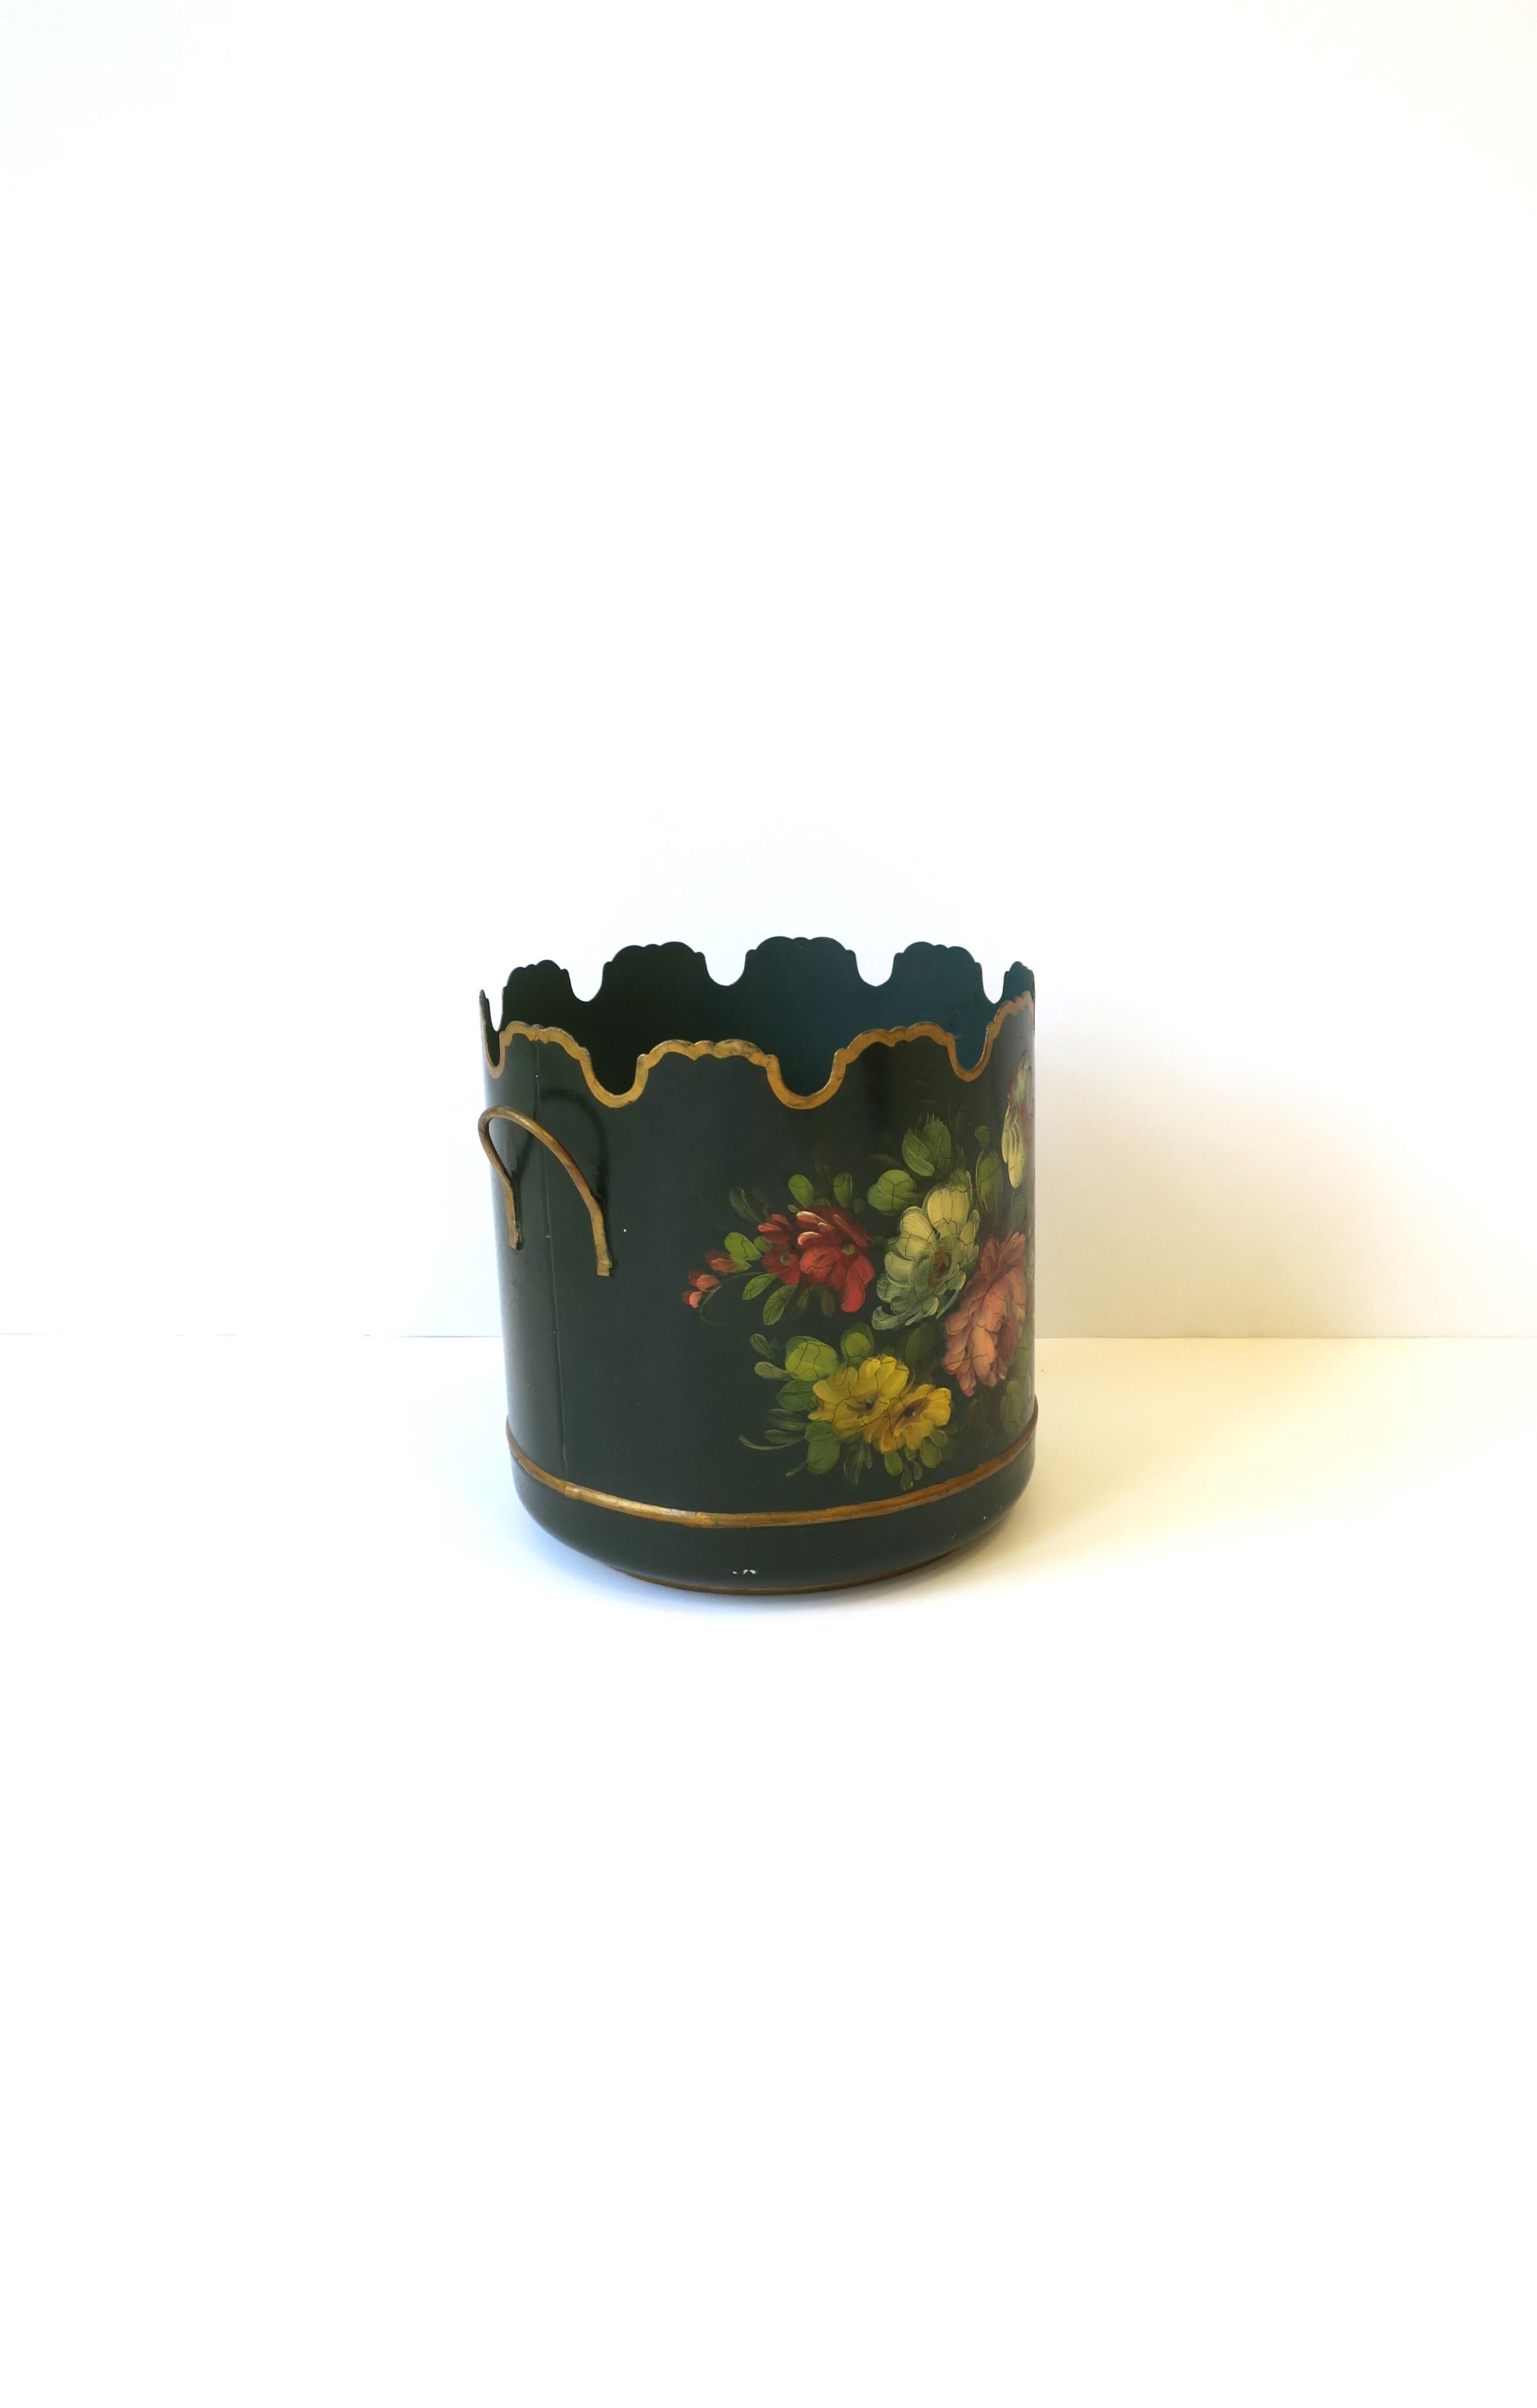 French Tôle Green & Gold Jardinière Cachepot with Scalloped Edge, 20th c France For Sale 1